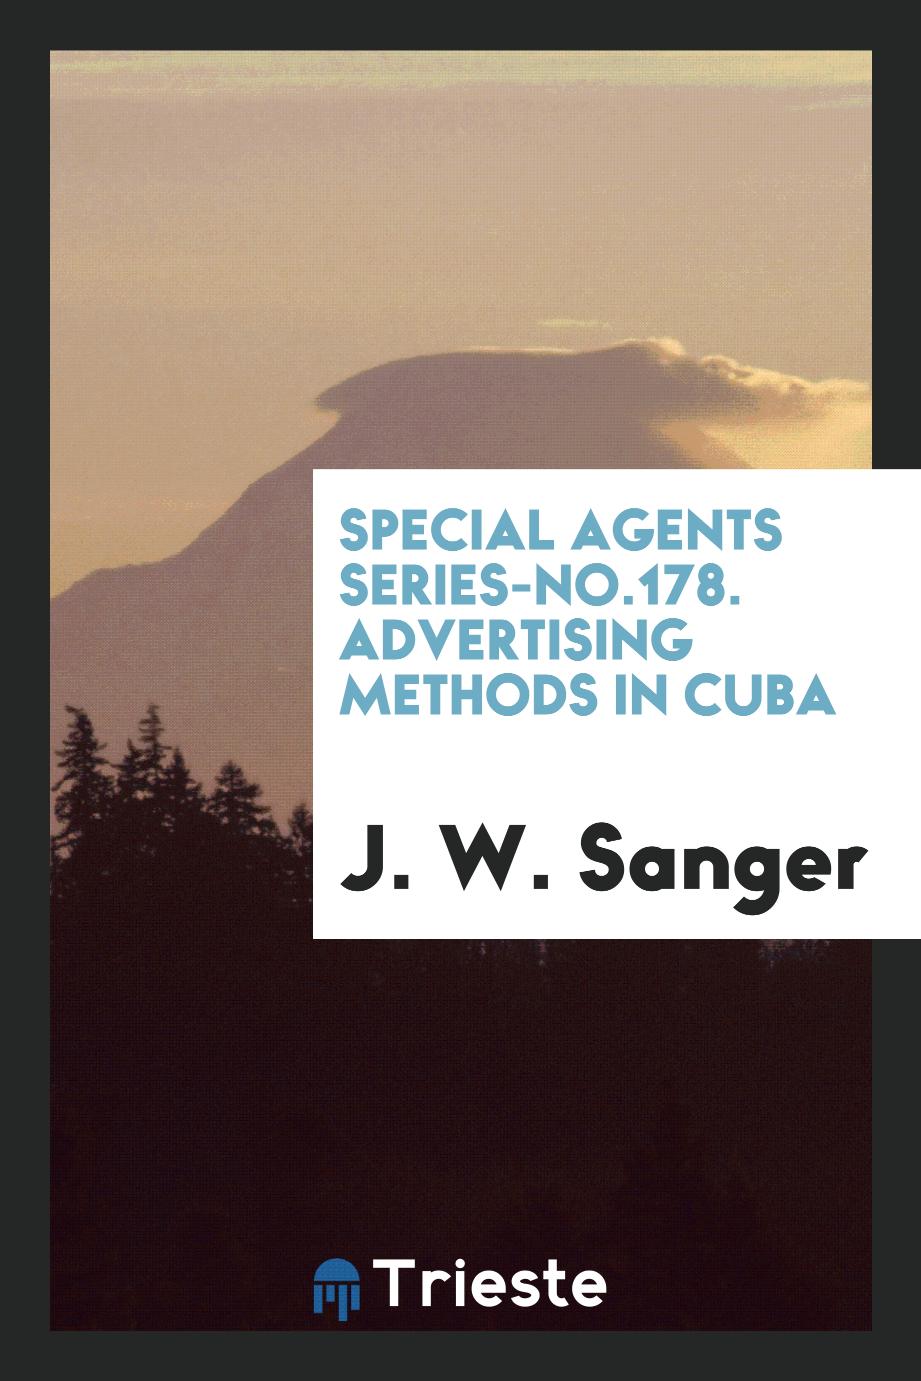 Special Agents Series-No.178. Advertising Methods in Cuba